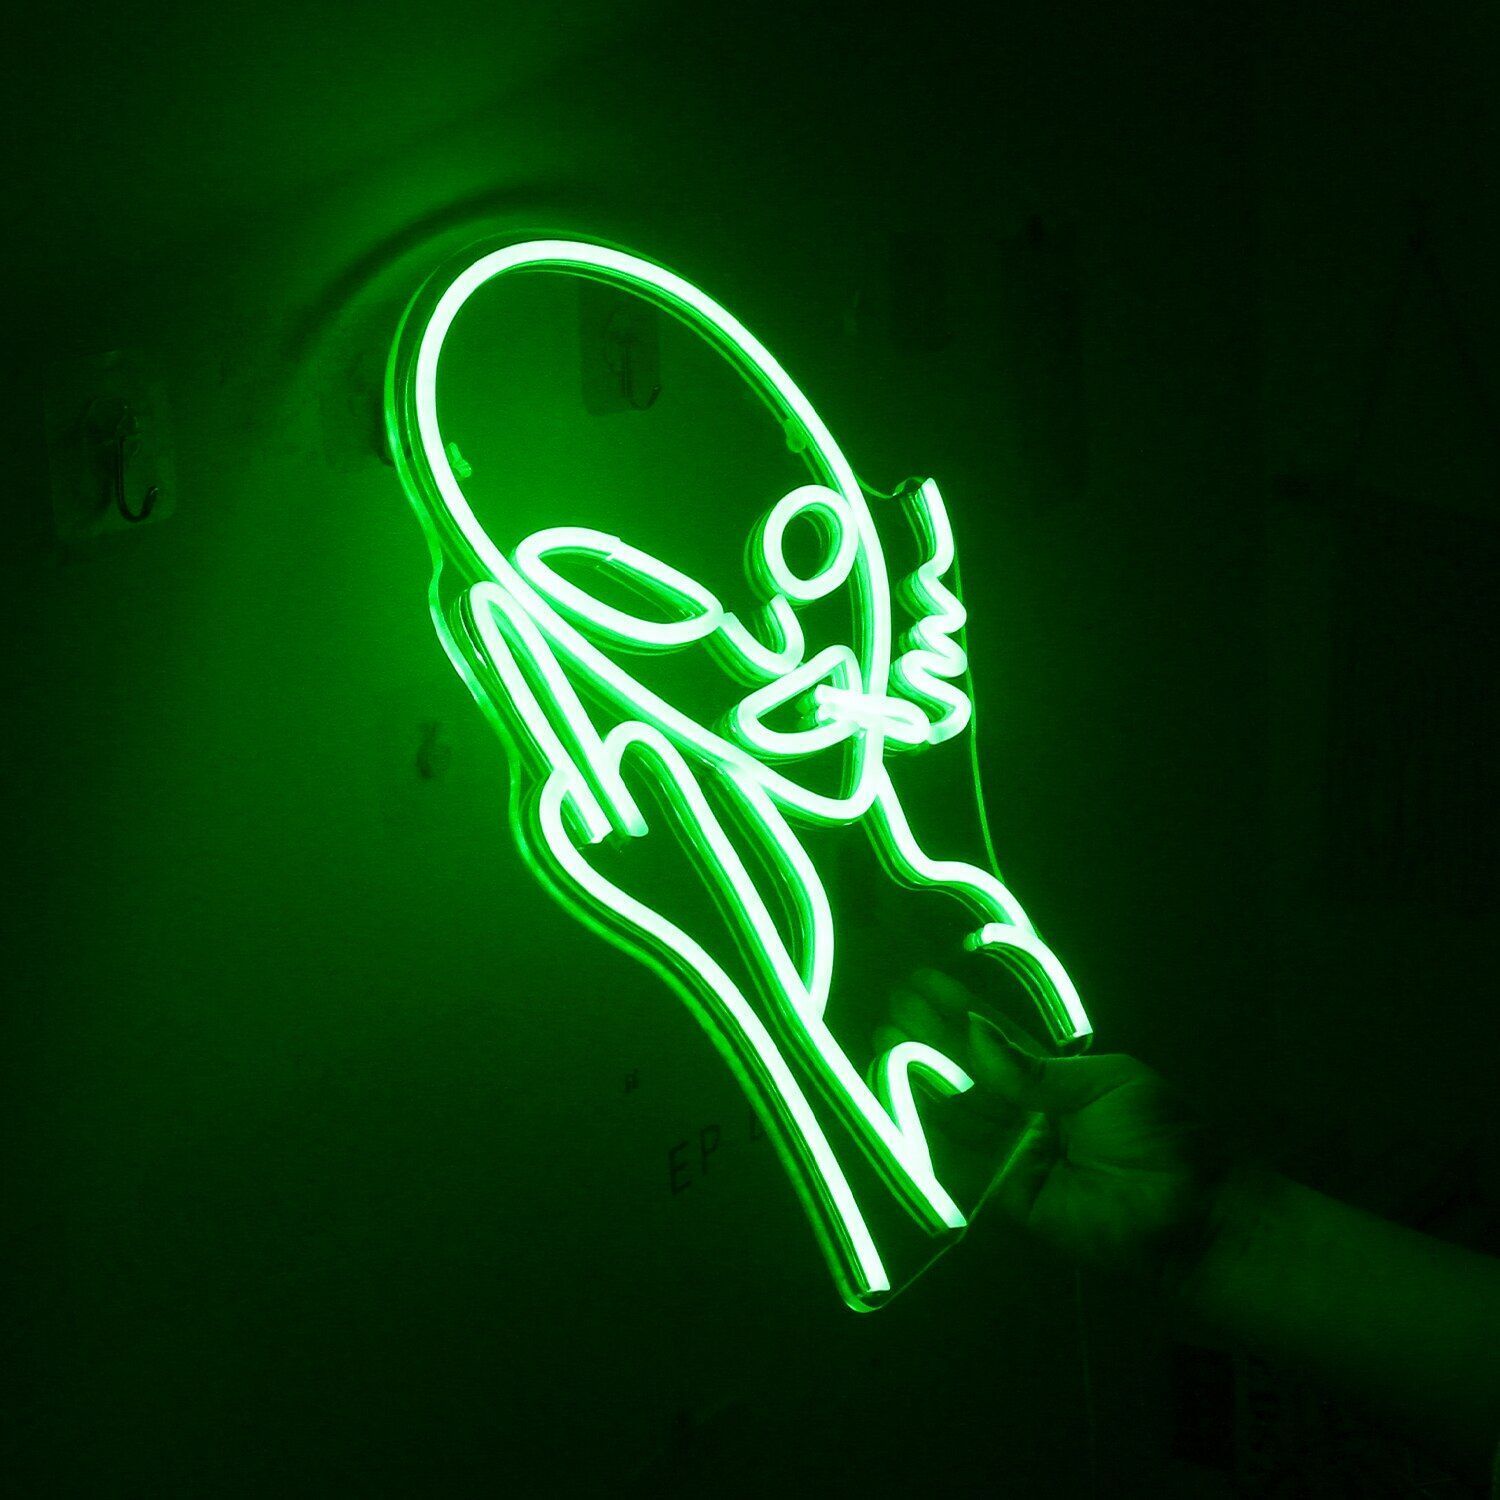 Smoking Alien Led Personality Design Neon Sign Mall Hotel Family Gathering Decor